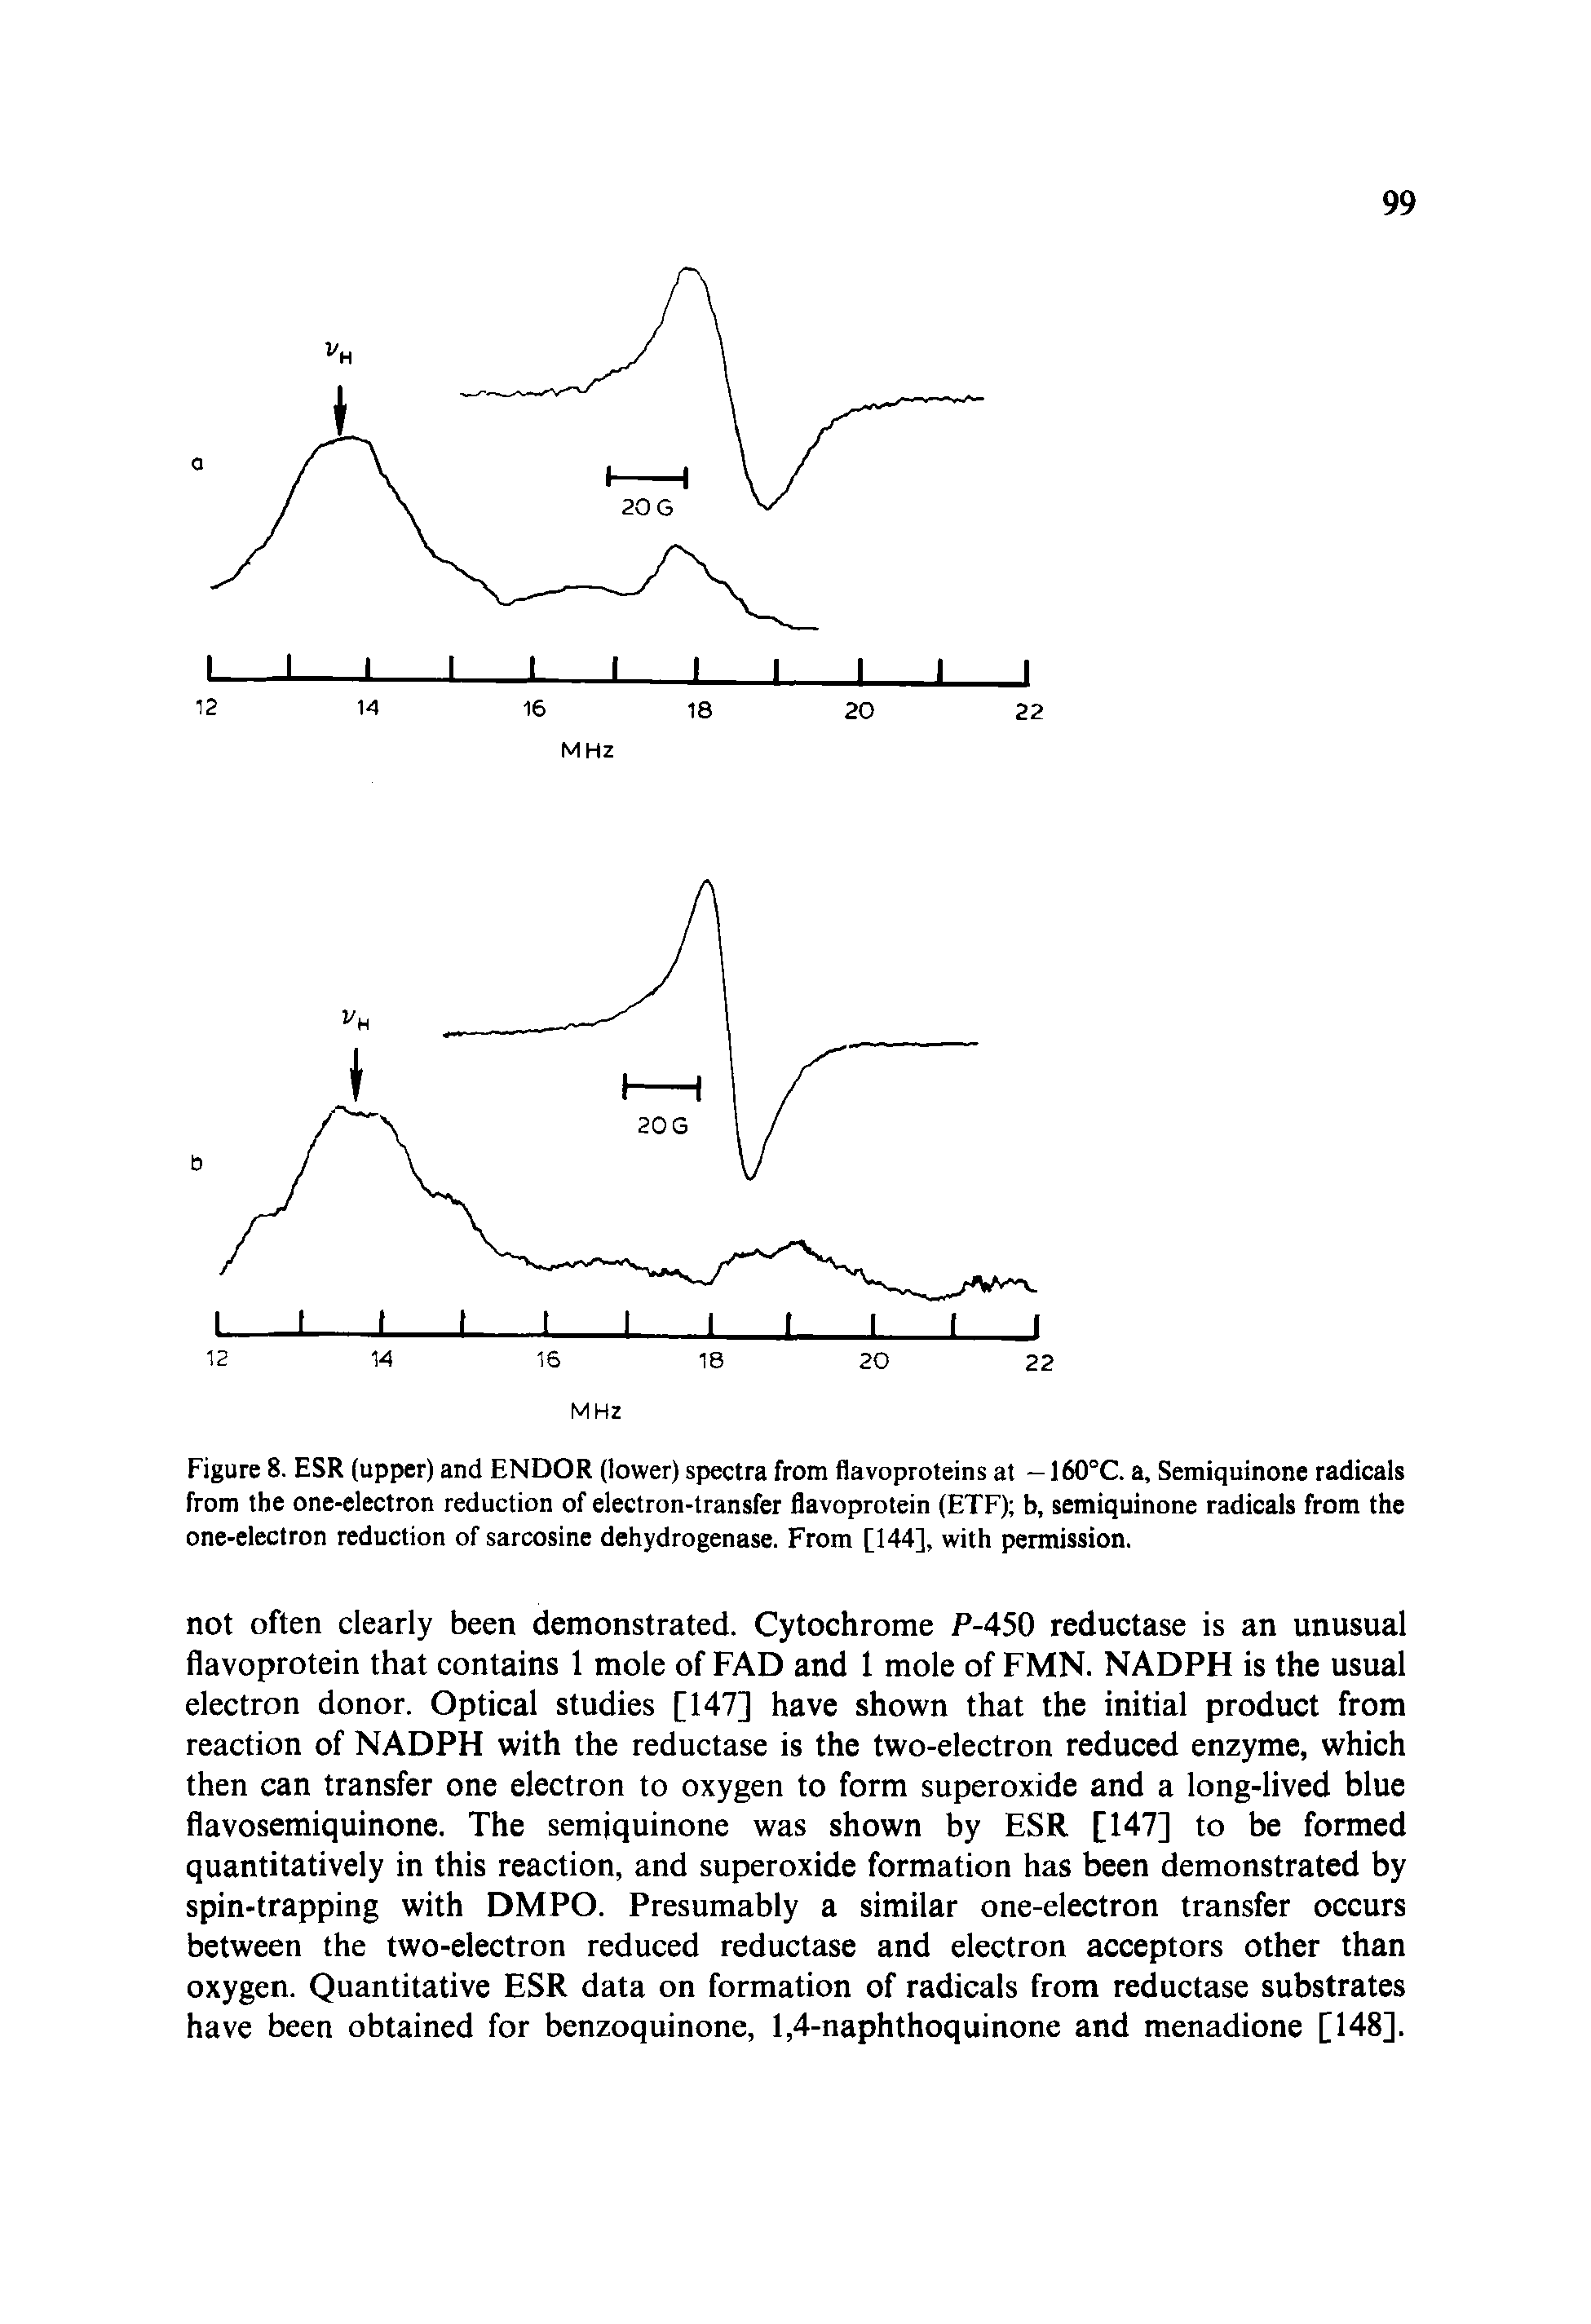 Figure 8. ESR (upper) and ENDOR (lower) spectra from flavoproteins at — 160°C. a, Semiquinone radicals from the one-electron reduction of electron-transfer flavoprotein (ETF) b, semiquinone radicals from the one-electron reduction of sarcosine dehydrogenase. From [144], with permission.